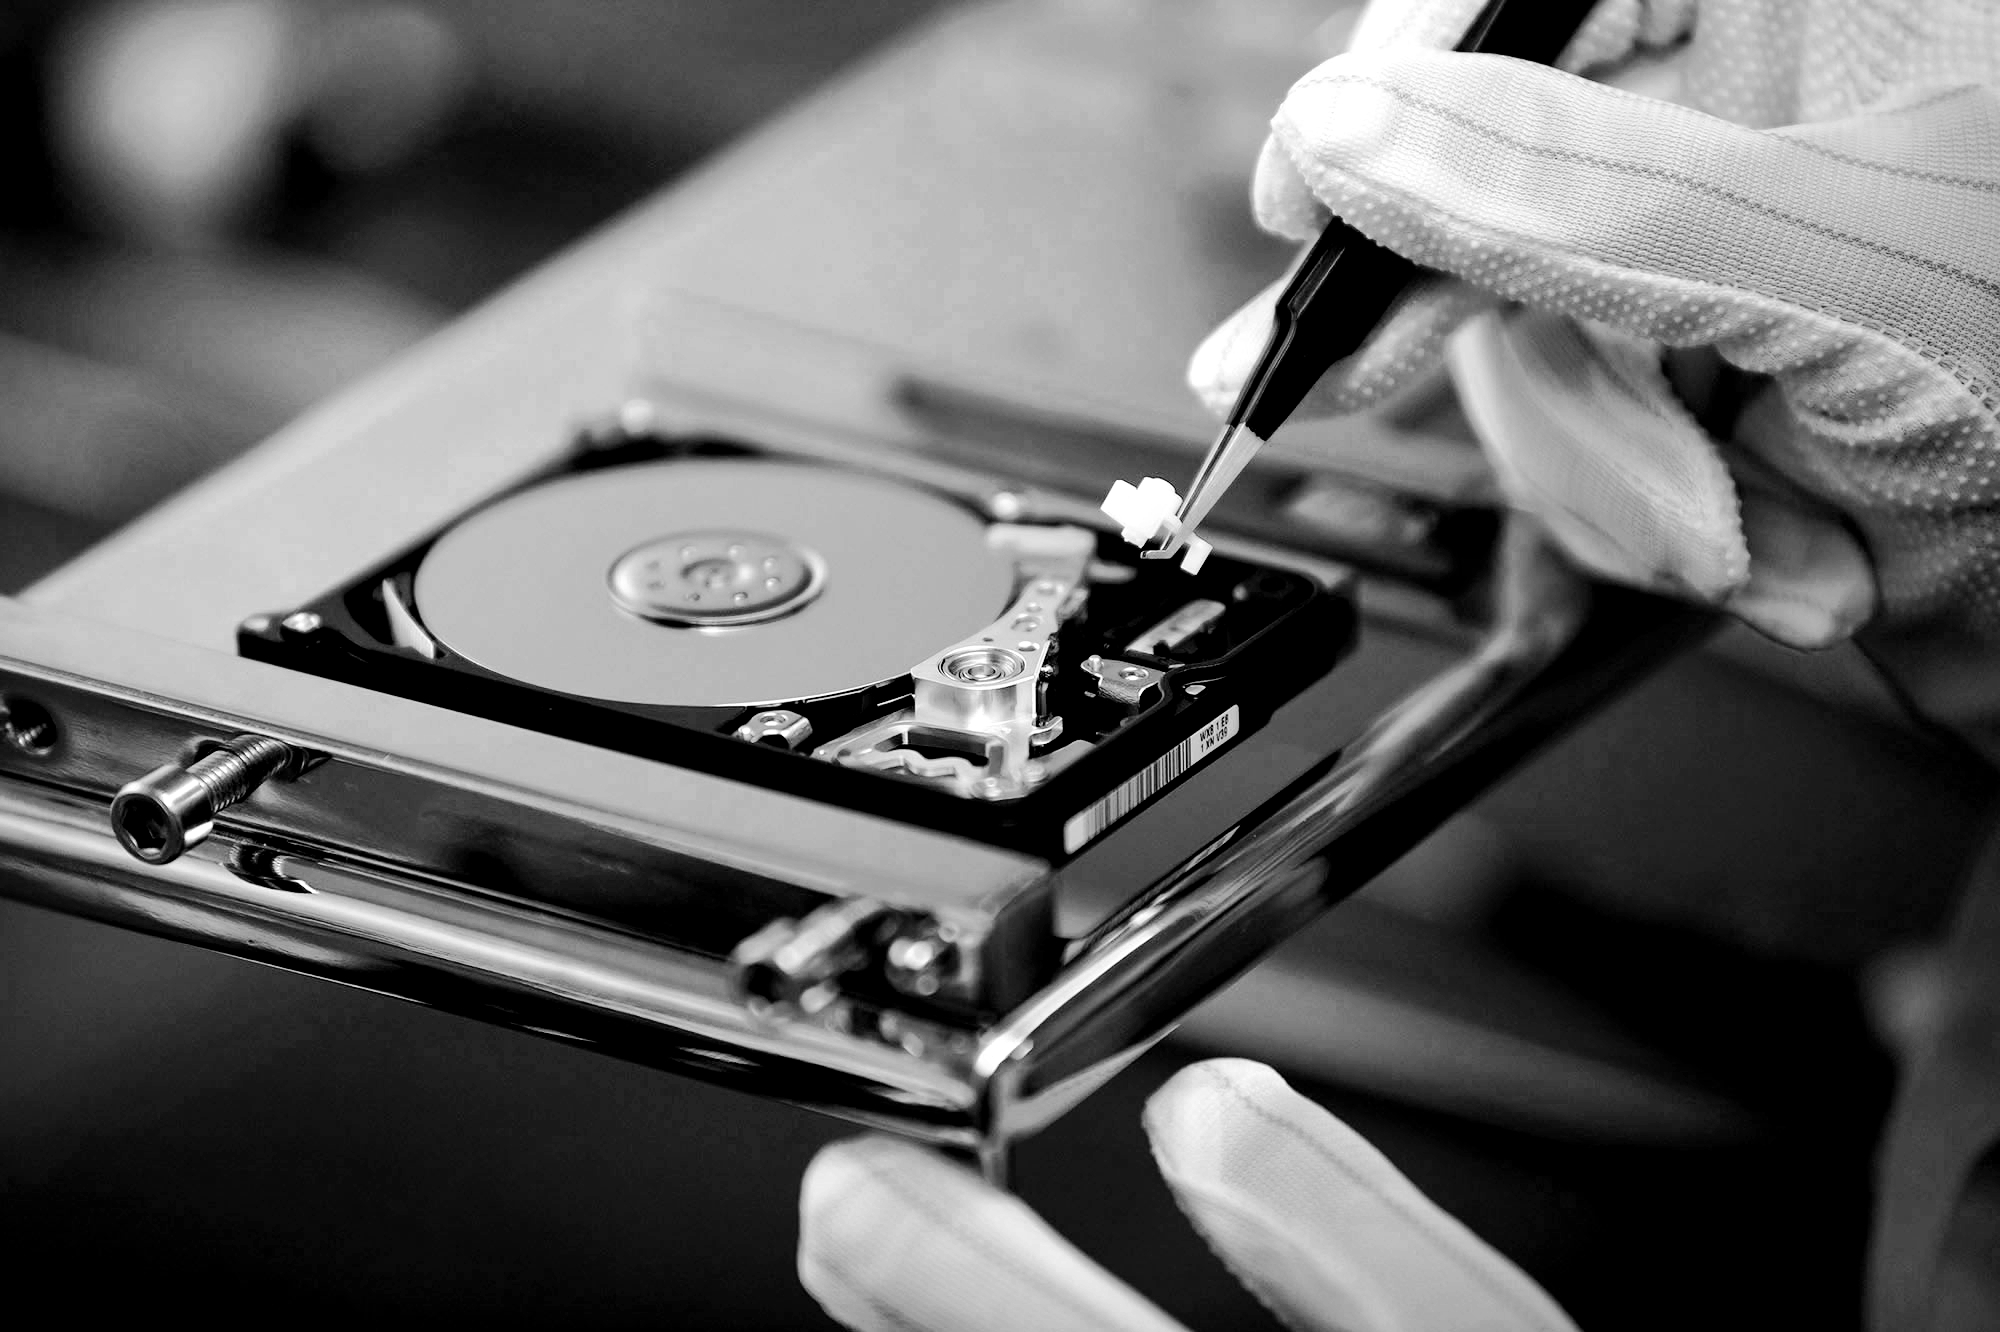 How To Data Recovery Services From Laptop Hard Drive?